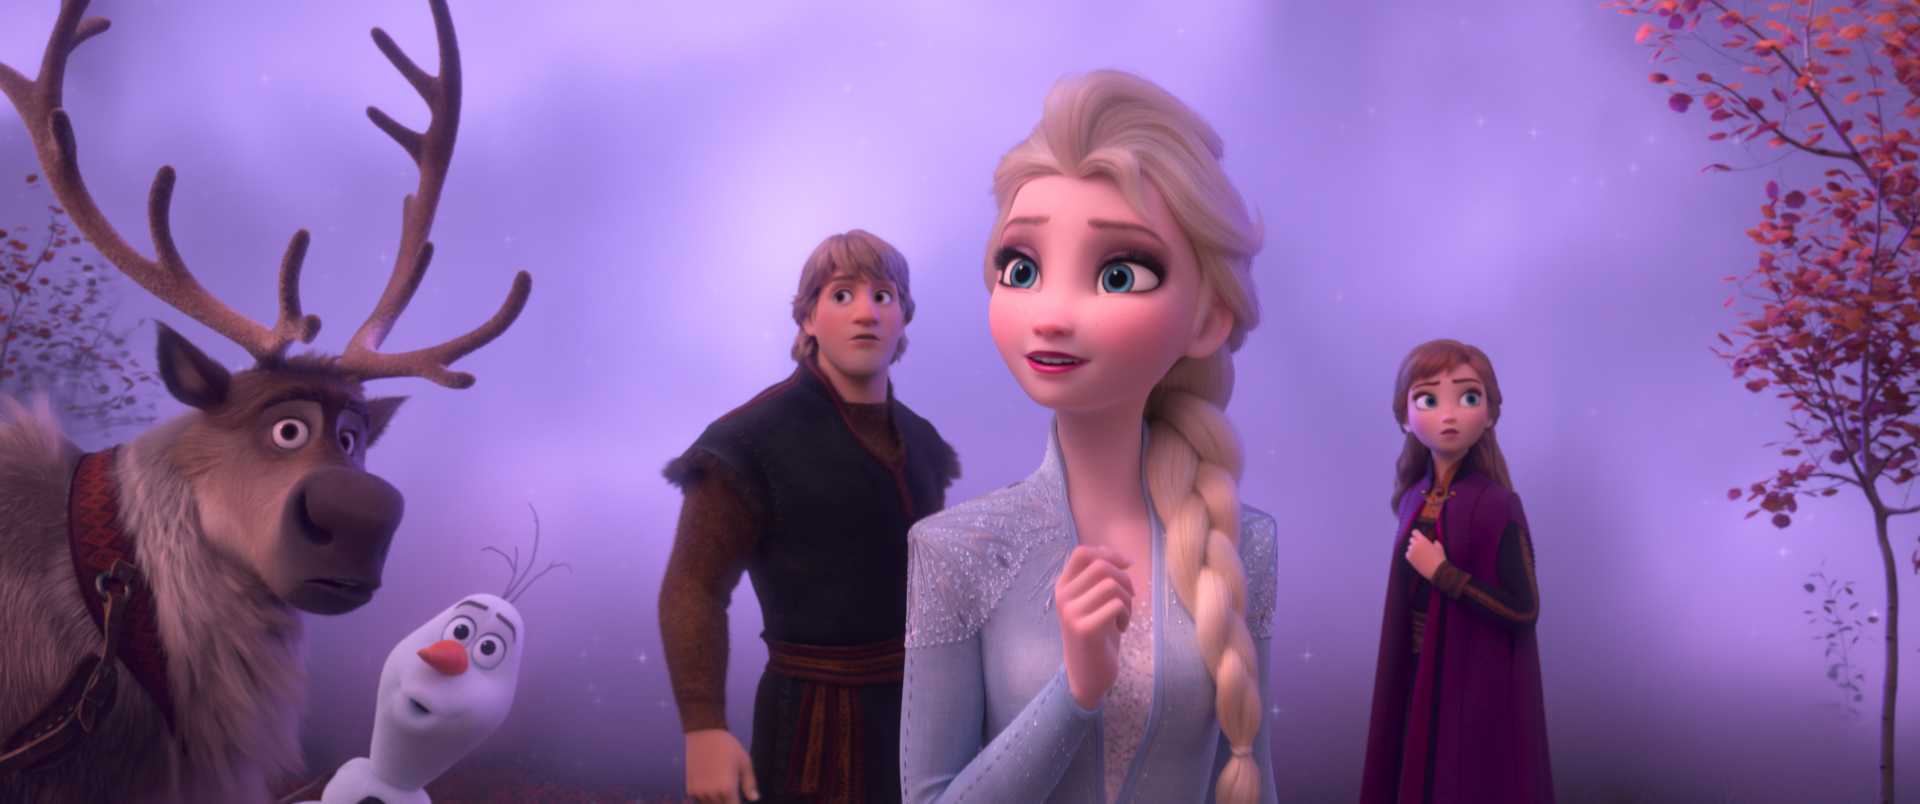 Best Quotes from Frozen 2